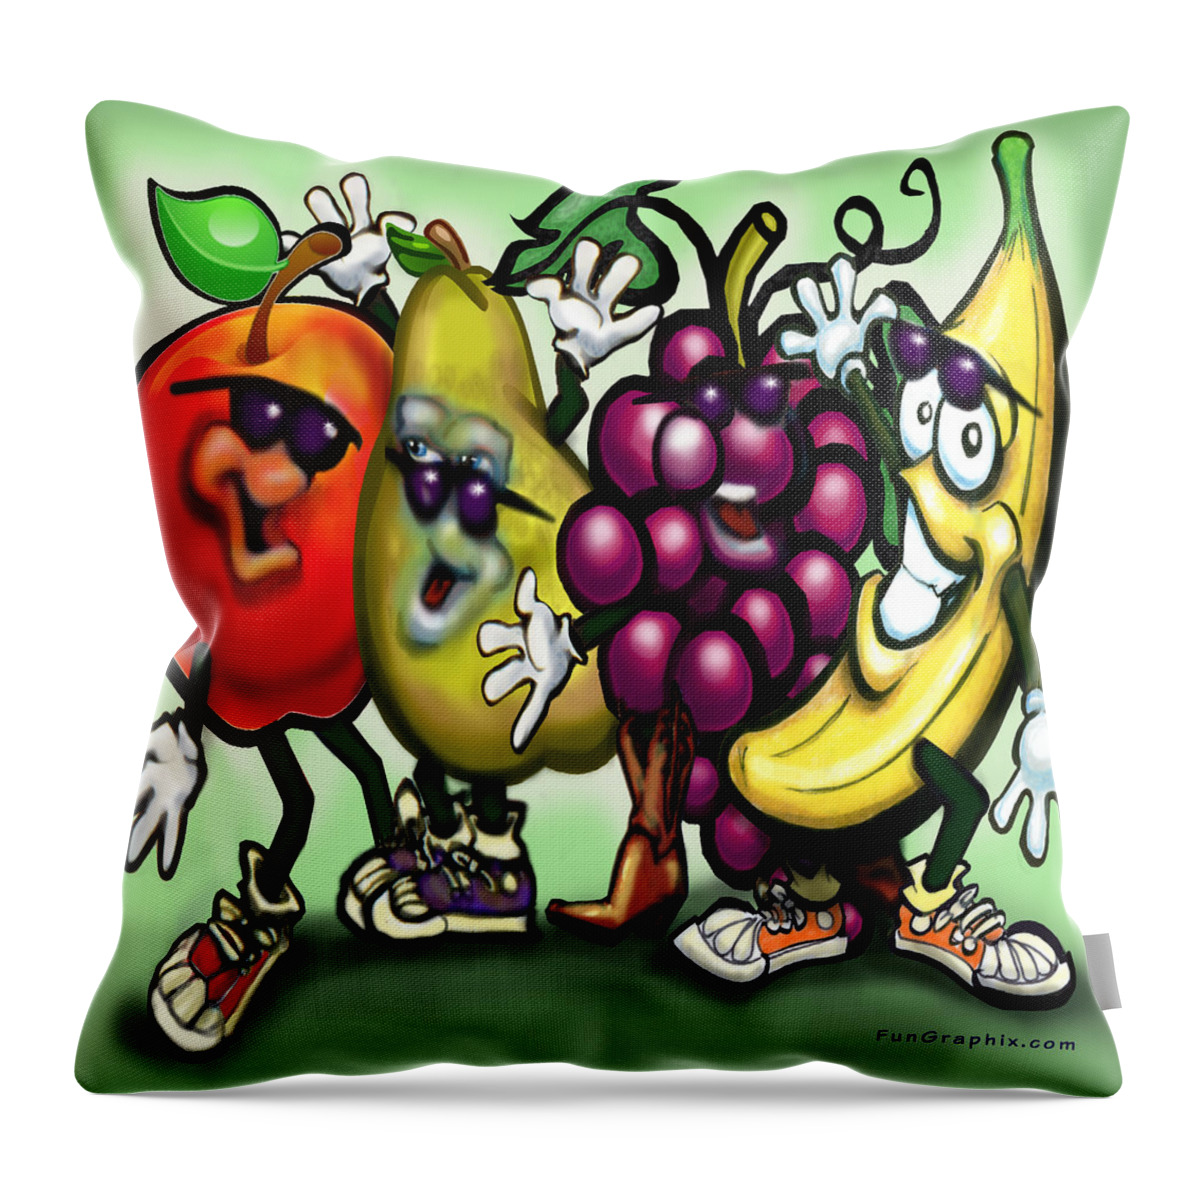 Fruit Throw Pillow featuring the painting Fruits by Kevin Middleton